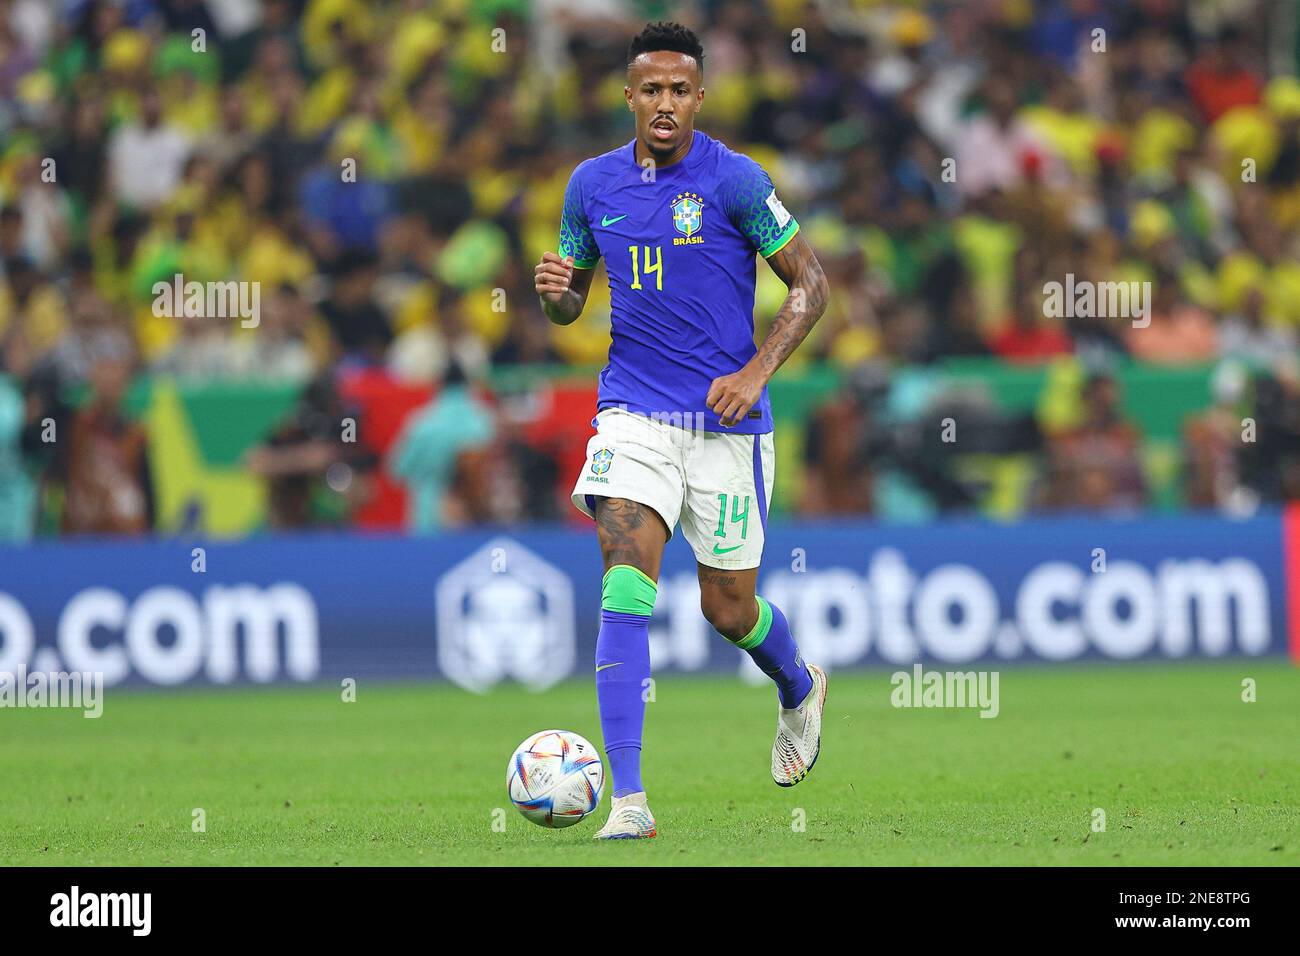 LUSAIL CITY, QATAR - DECEMBER 02: Eder Militao  during the FIFA World Cup Qatar 2022 Group G match between Cameroon and Brazil at Lusail Stadium on December 02, 2022 in Lusail City, Qatar. (Photo by MB Media) Stock Photo